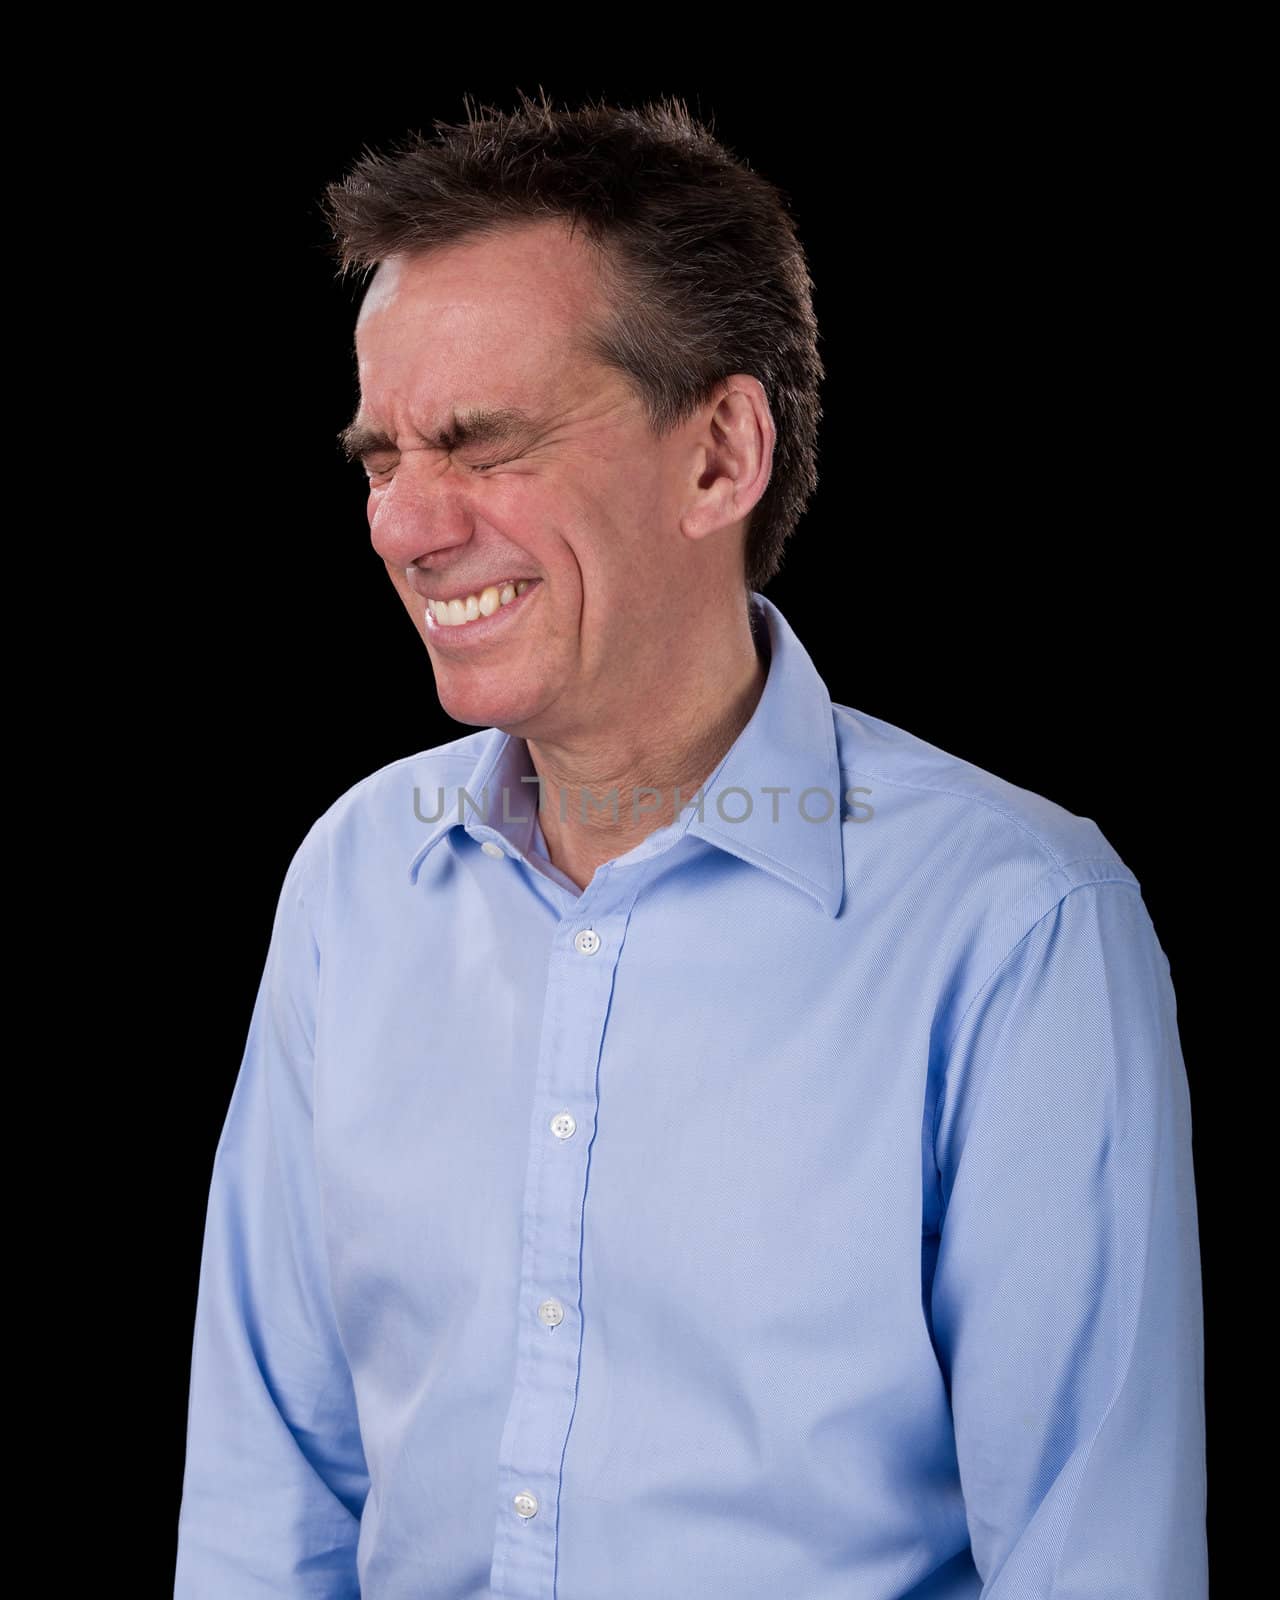 Middle Age Business Man with Eyes Screwed up in Horrified Reaction Black Background